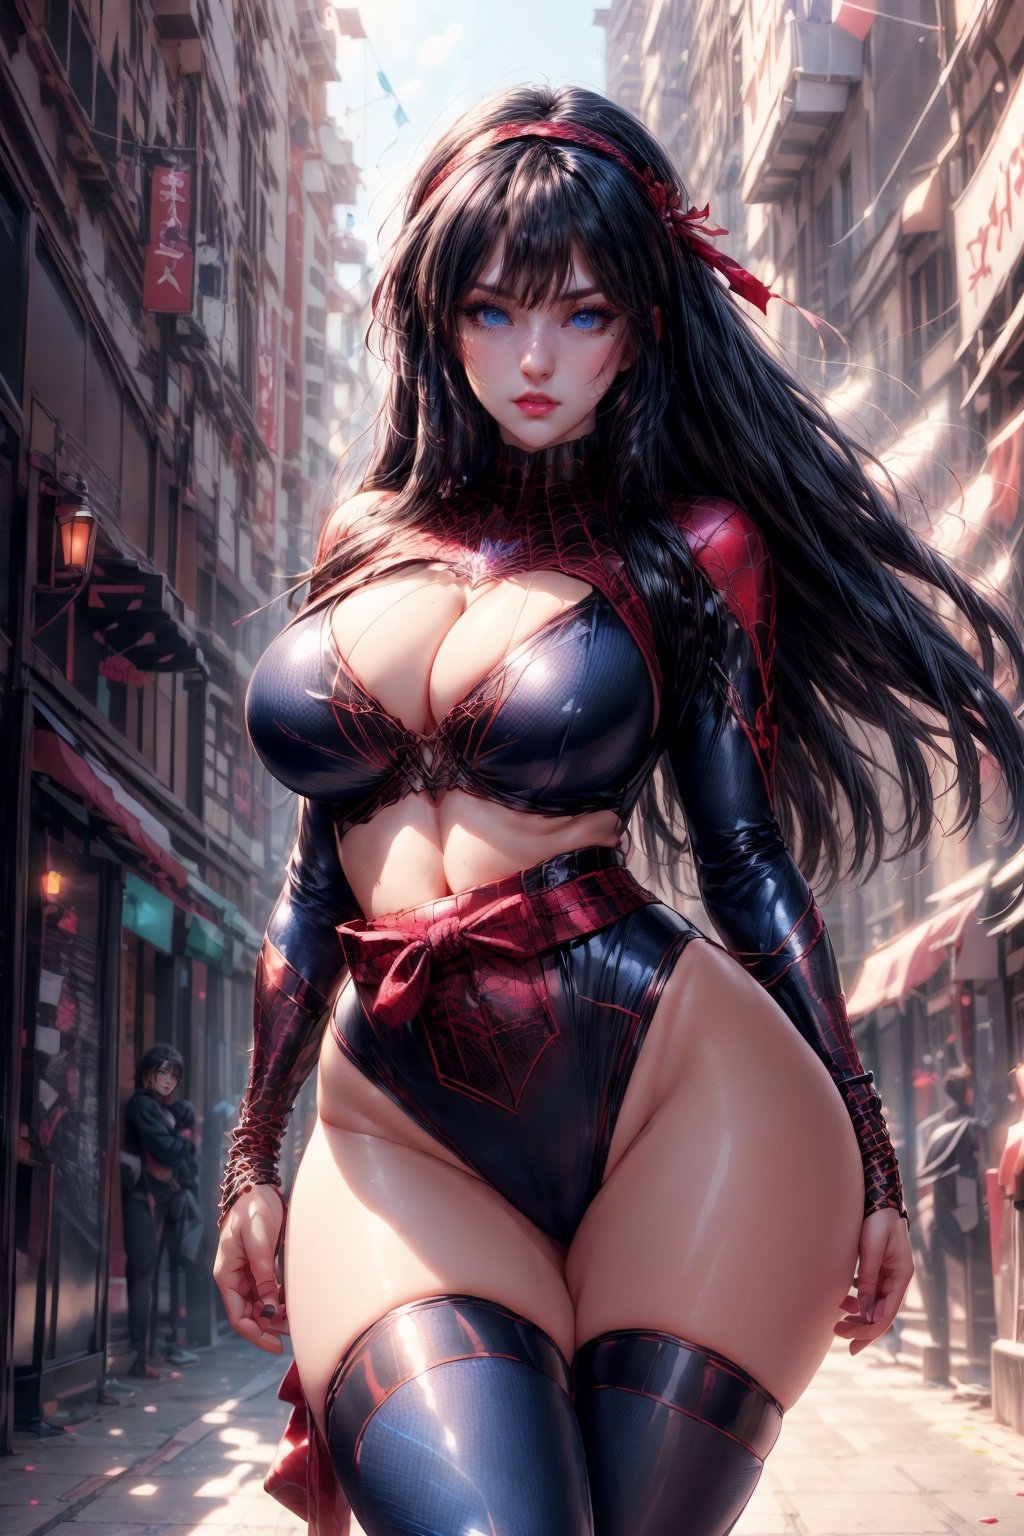 ((1 girl, adorable, Cool )), ((,chest sarashi, thighhighs, sash)), (headband,dark blue hair, long hair, blue eyes, makeup), (large breasts, large ass, thighs, wide hips, abs, voloptuous), background sakura,Dancer Outfit ,wearing spiderwoman_cosplay_outfit